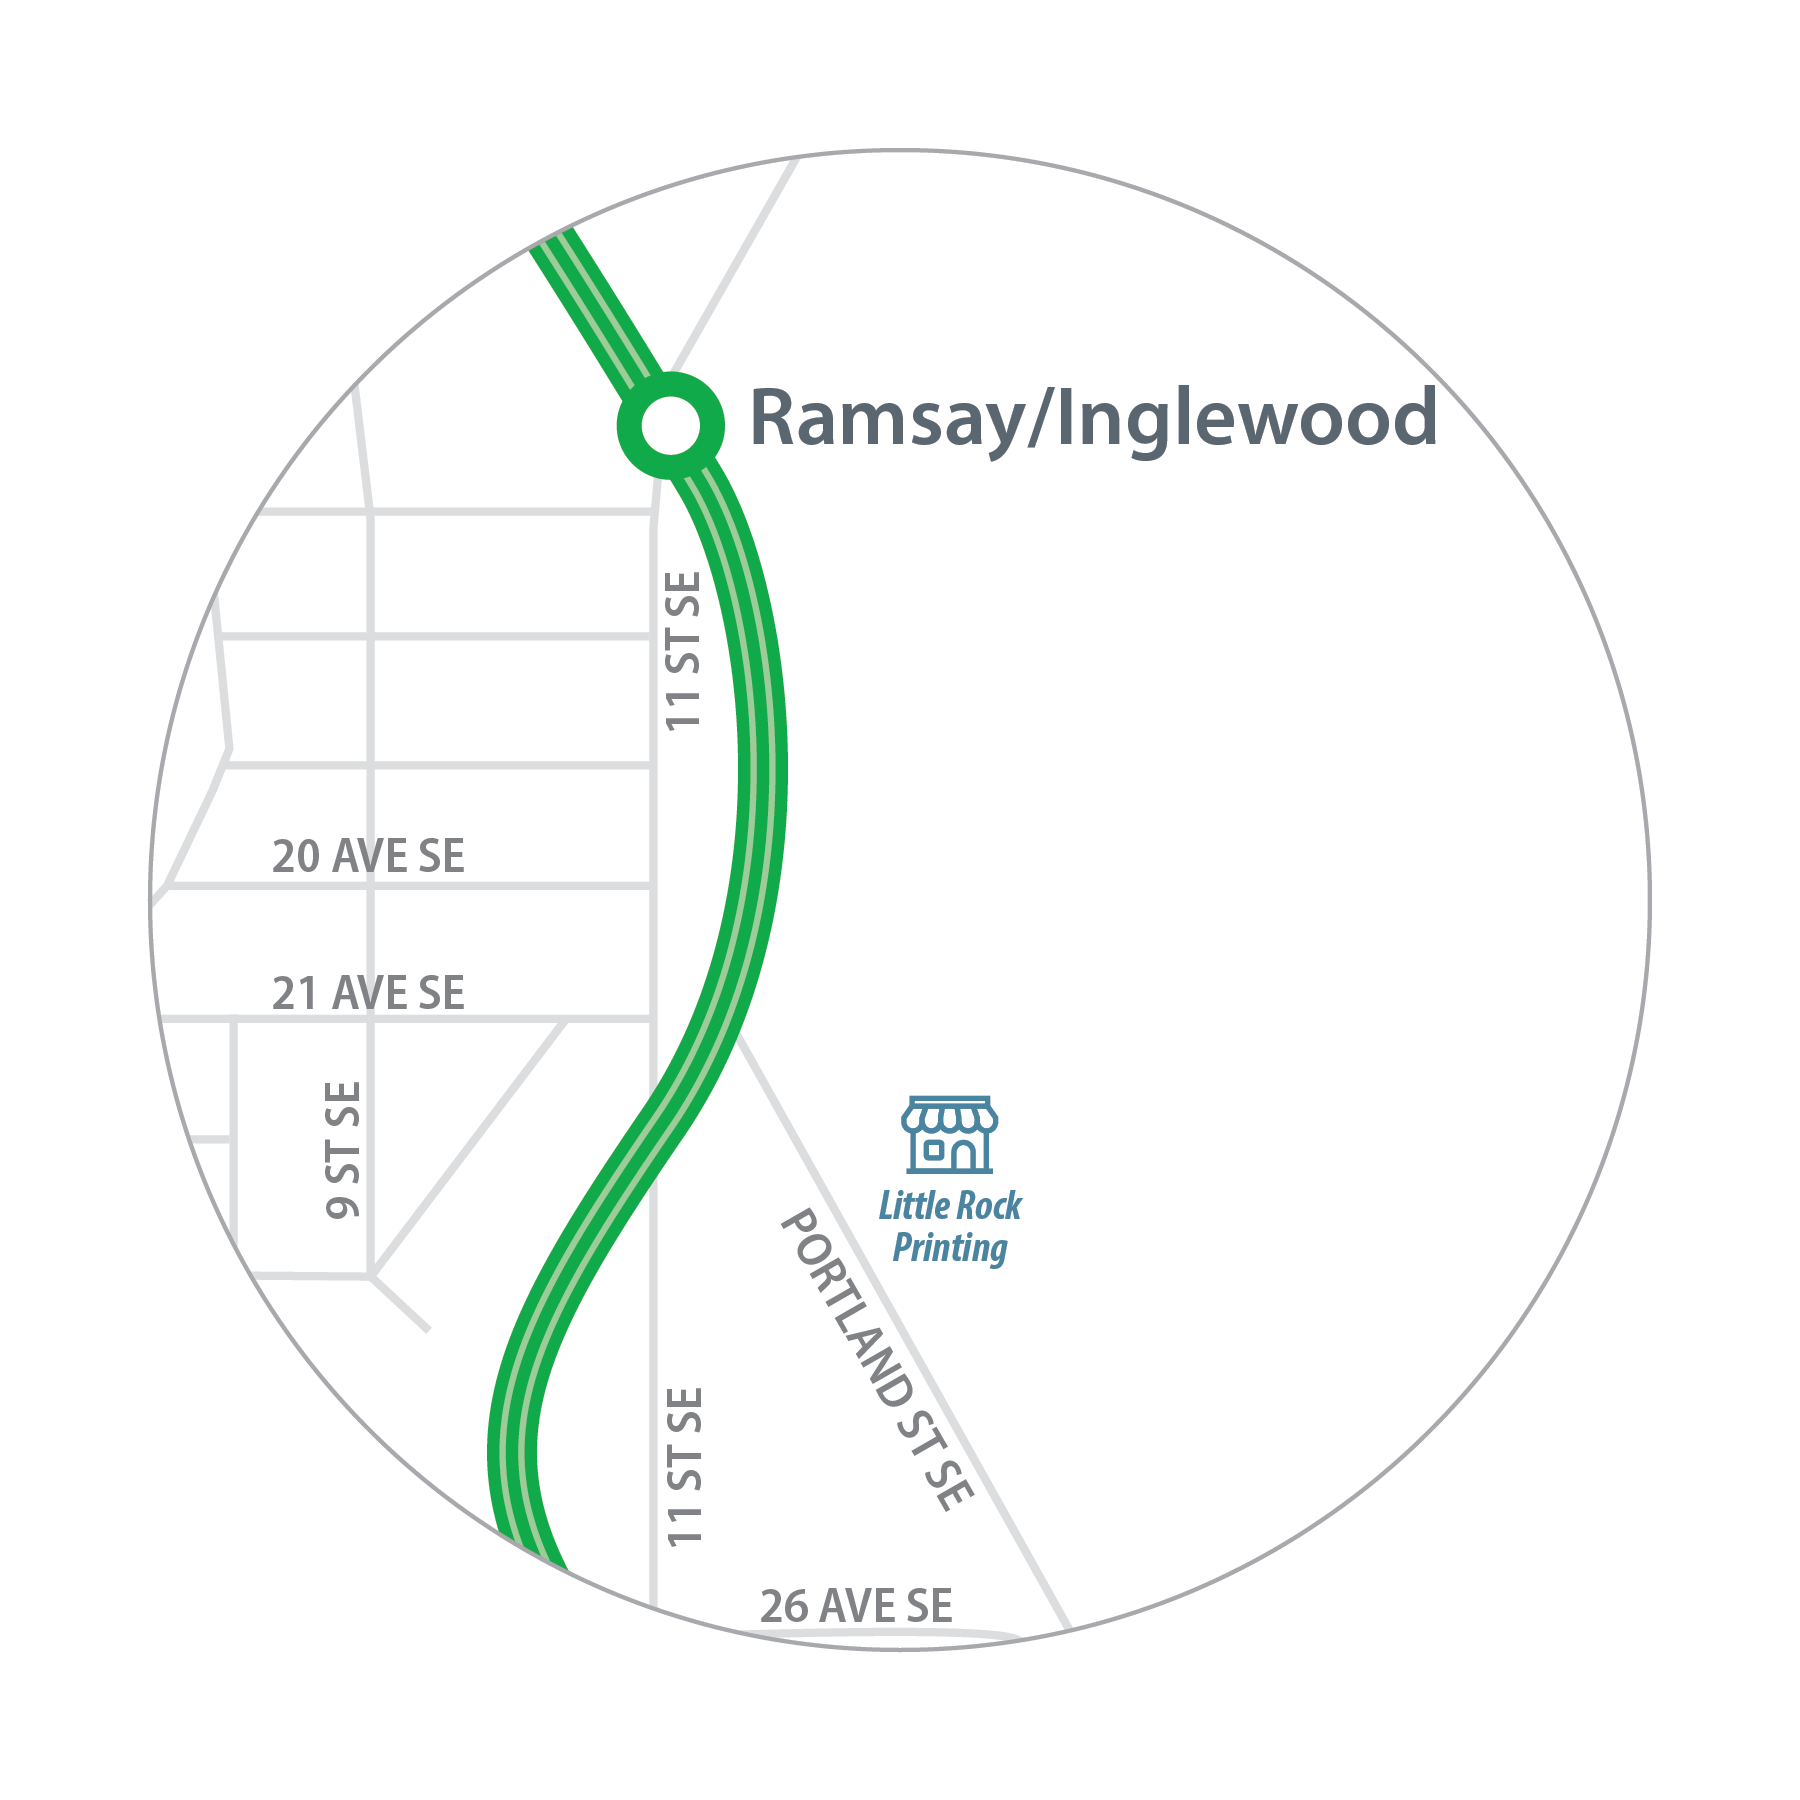 Map of Little Rock Printing location in relation to Ramsay/Inglewood Station.